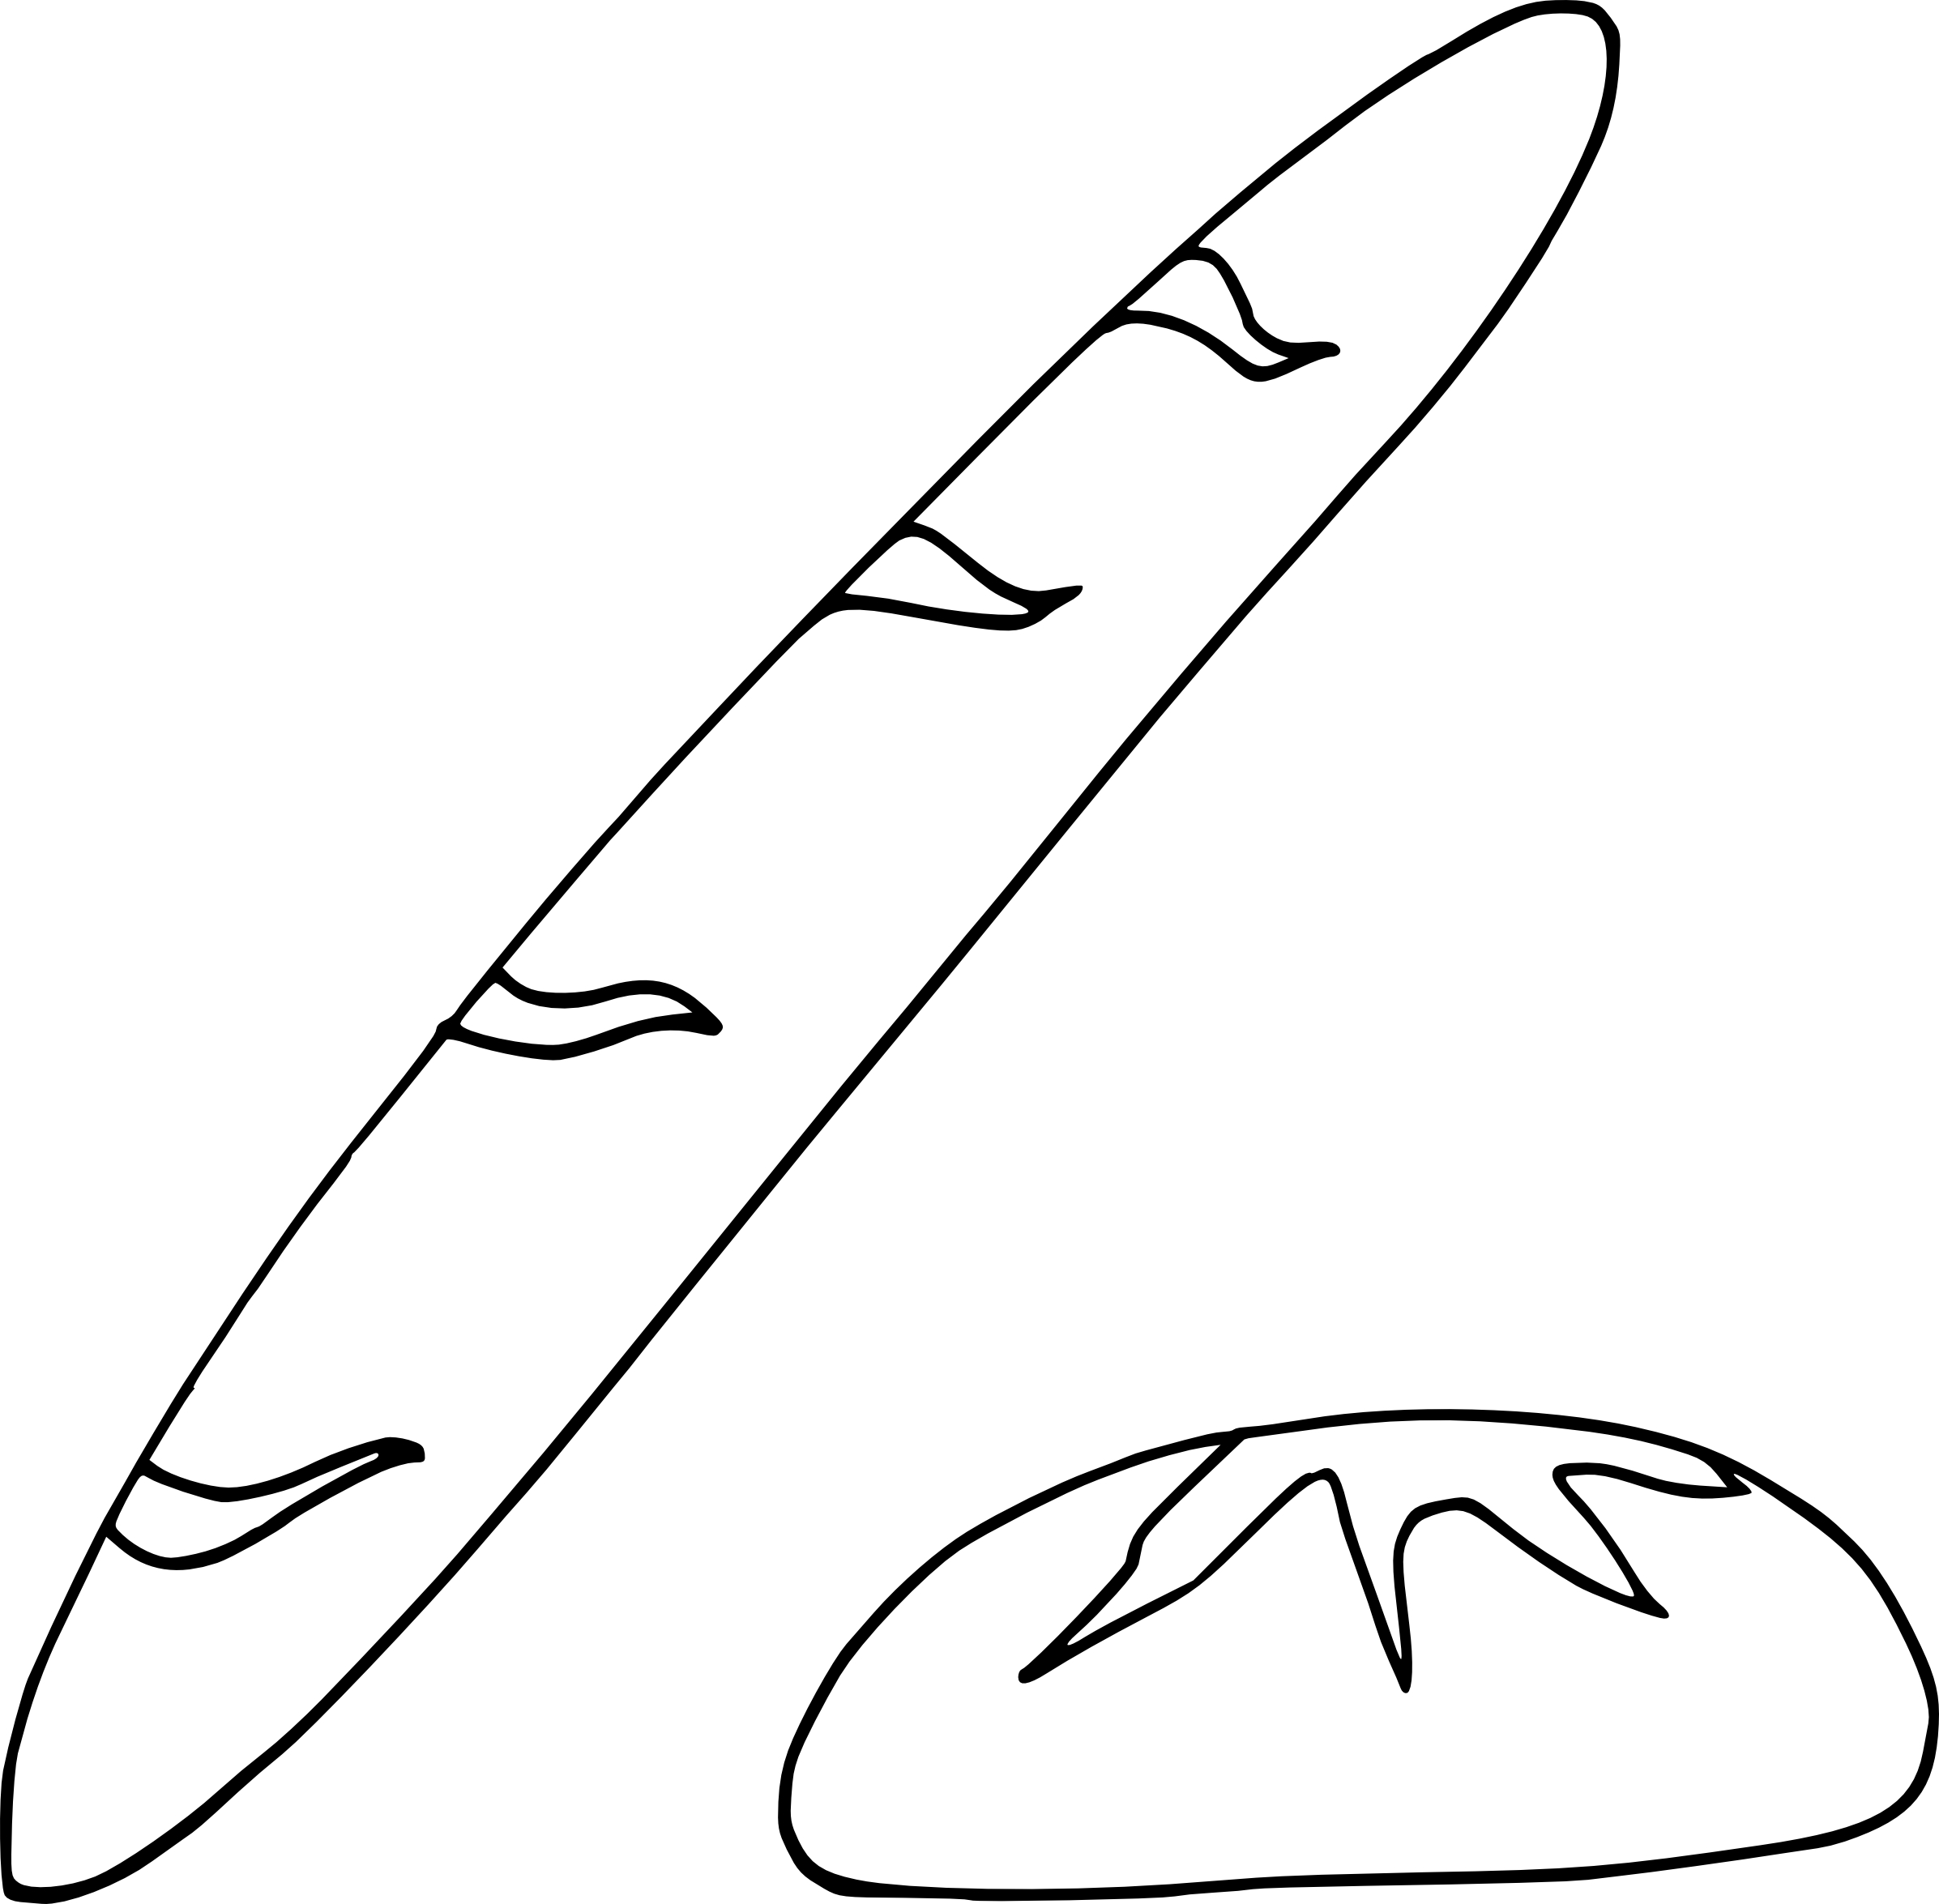 Free bread coloring page to print and color